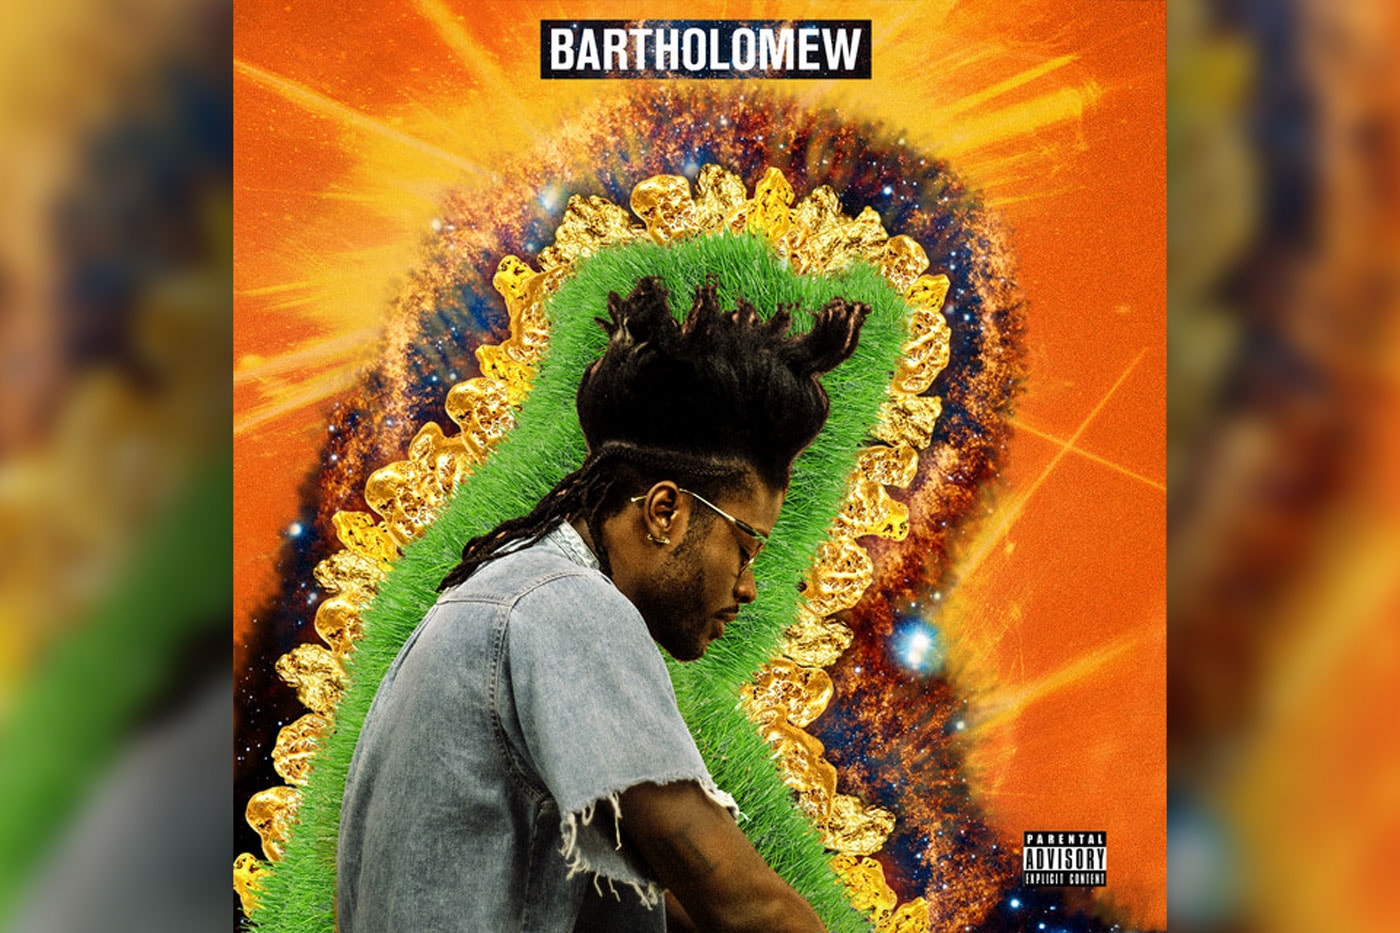 EXCLUSIVE: Jesse Boykins III Speaks on New Surprise Project 'BARTHOLOMEW,' Featuring Isaiah Rashad, Willow Smith & More